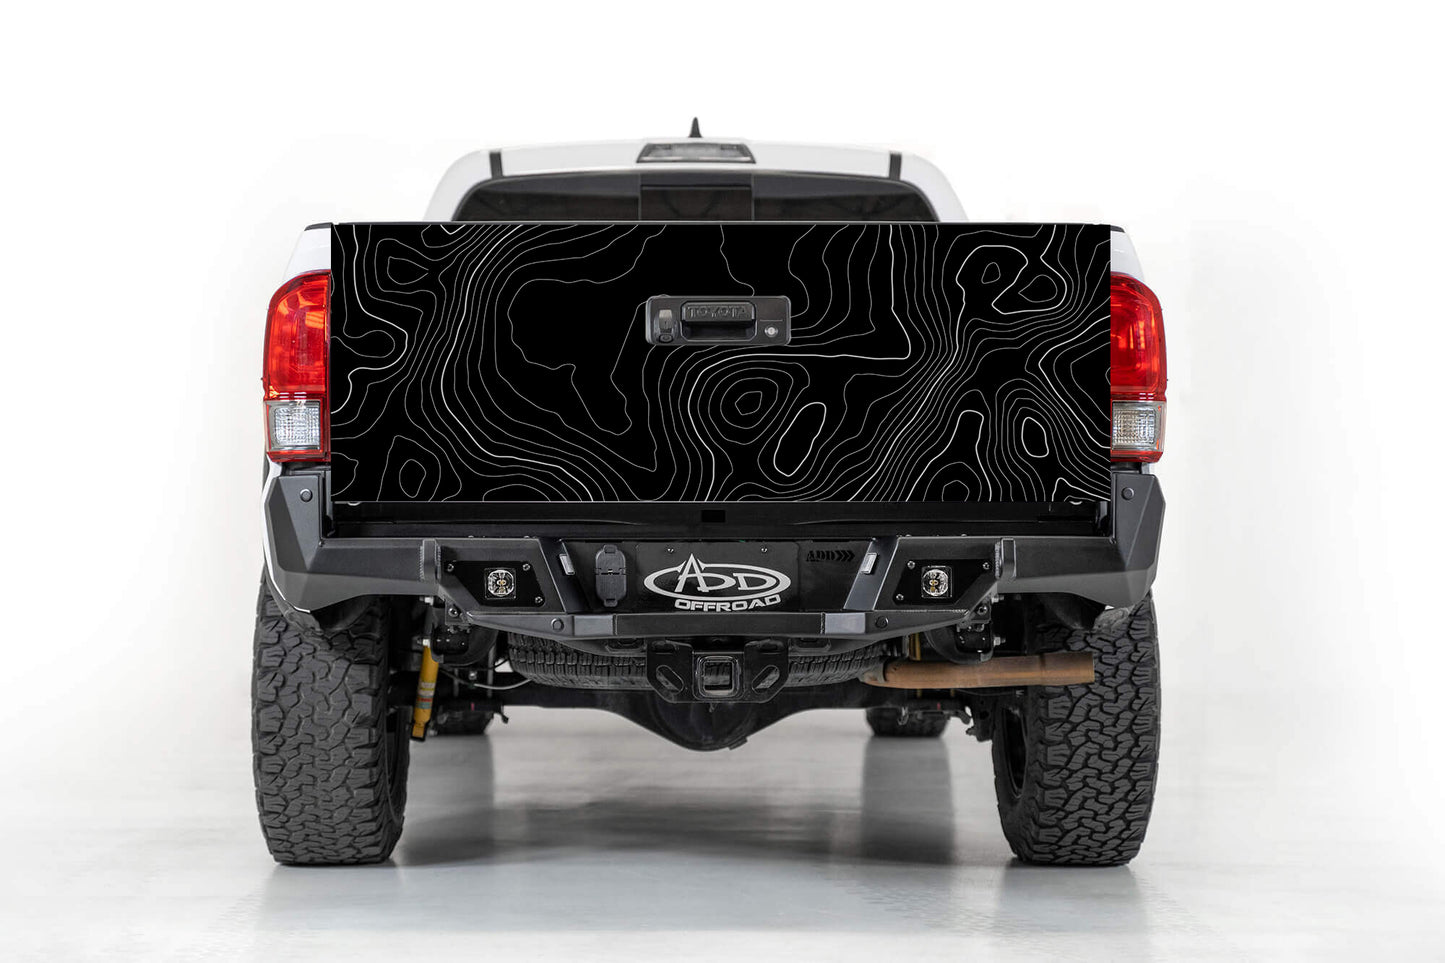 Topography Map Tailgate Wrap Vinyl Graphic Decal Sticker Wrap